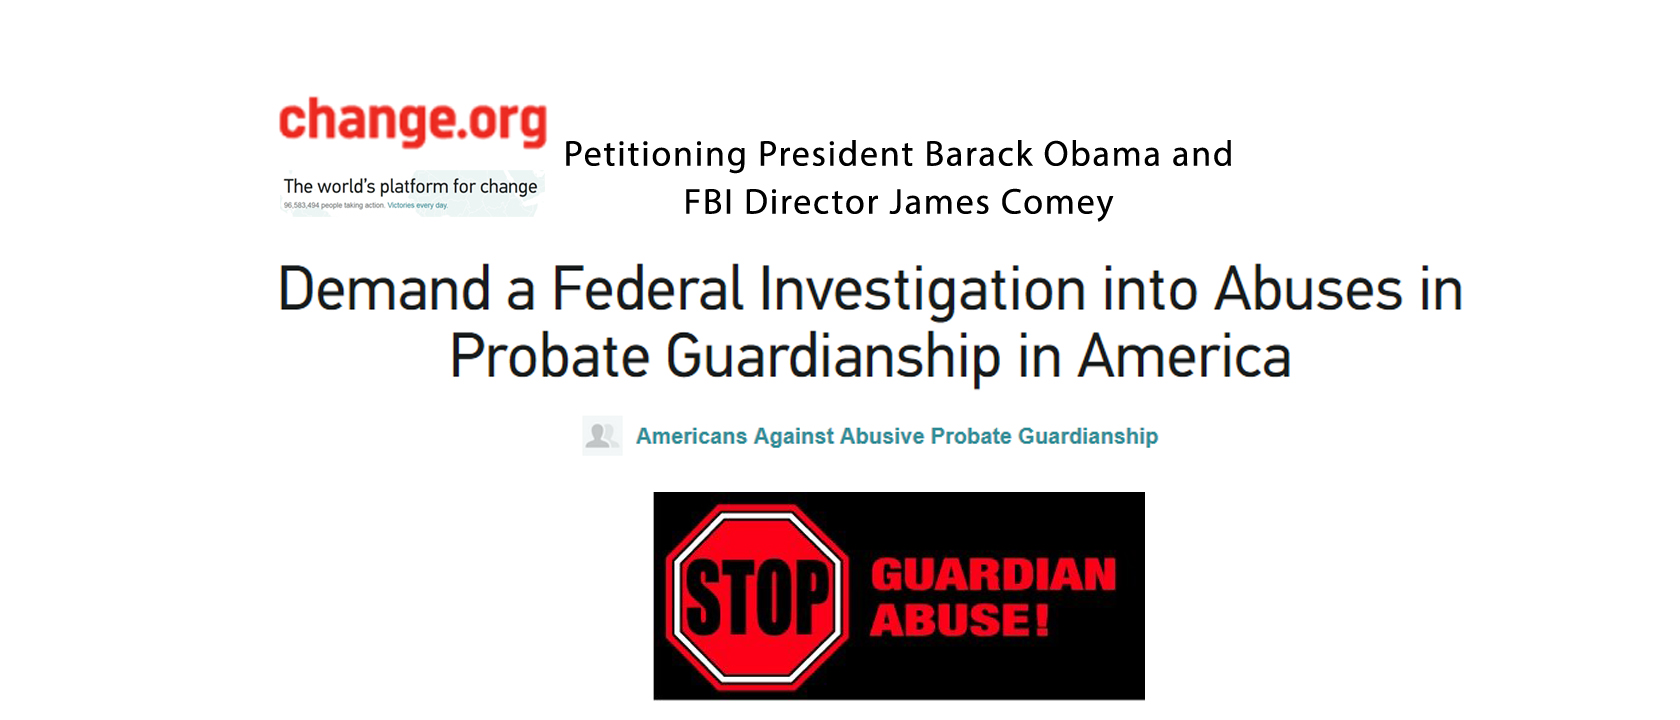 Petitioning President Barack Obama and FBI Director James Comey: Demand a Federal Investigation into Abuses in Probate Guardianship in America